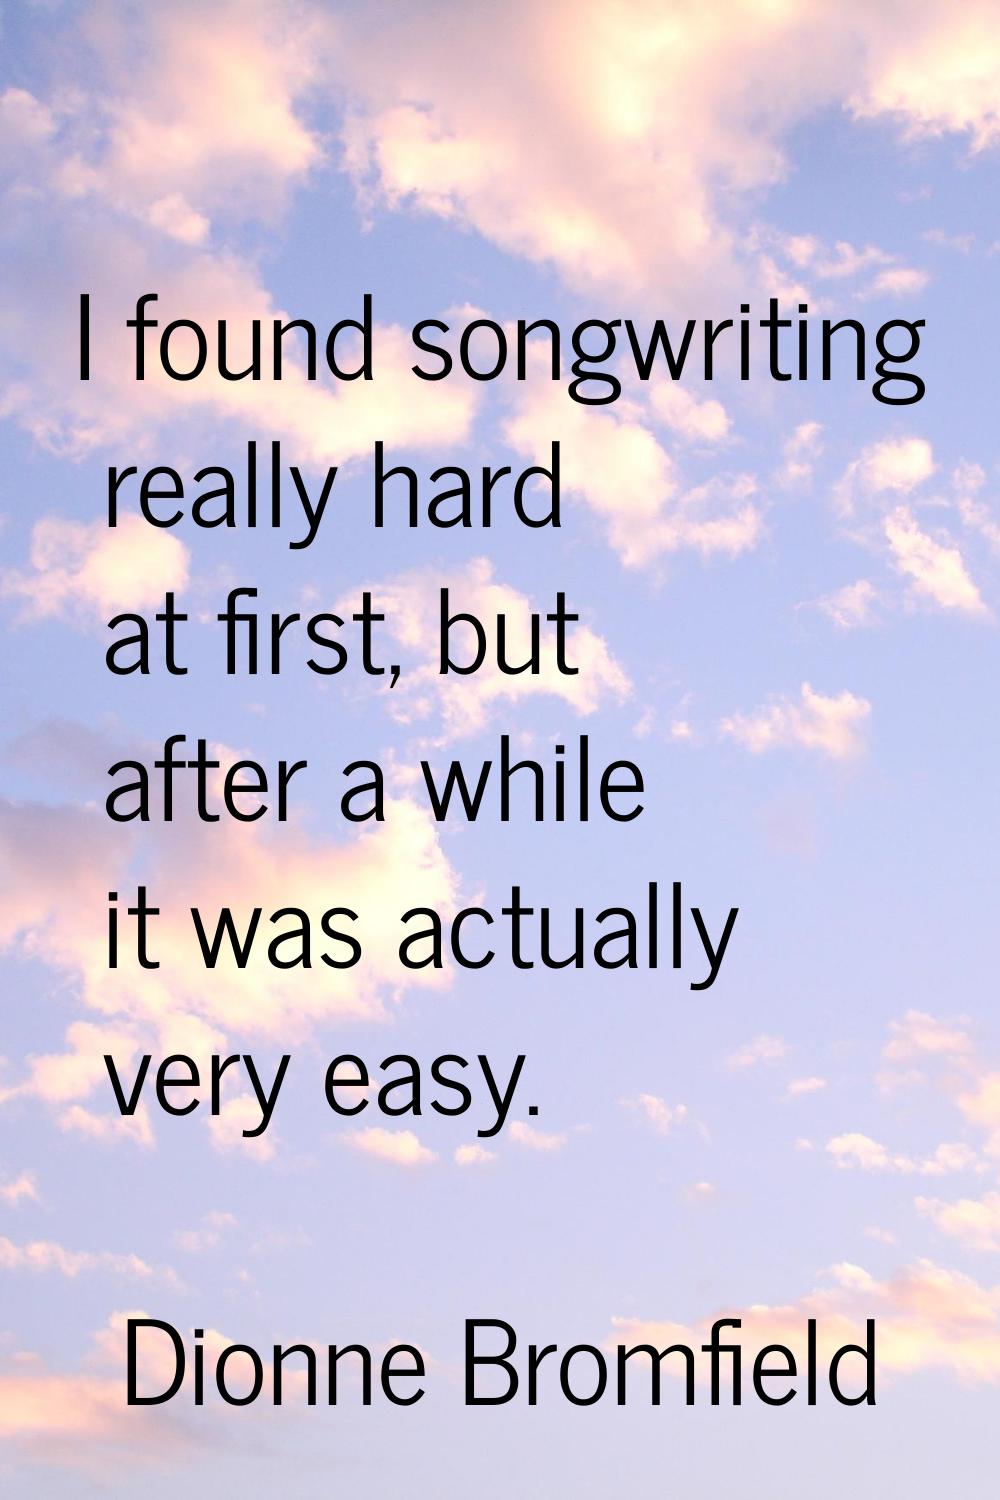 I found songwriting really hard at first, but after a while it was actually very easy.